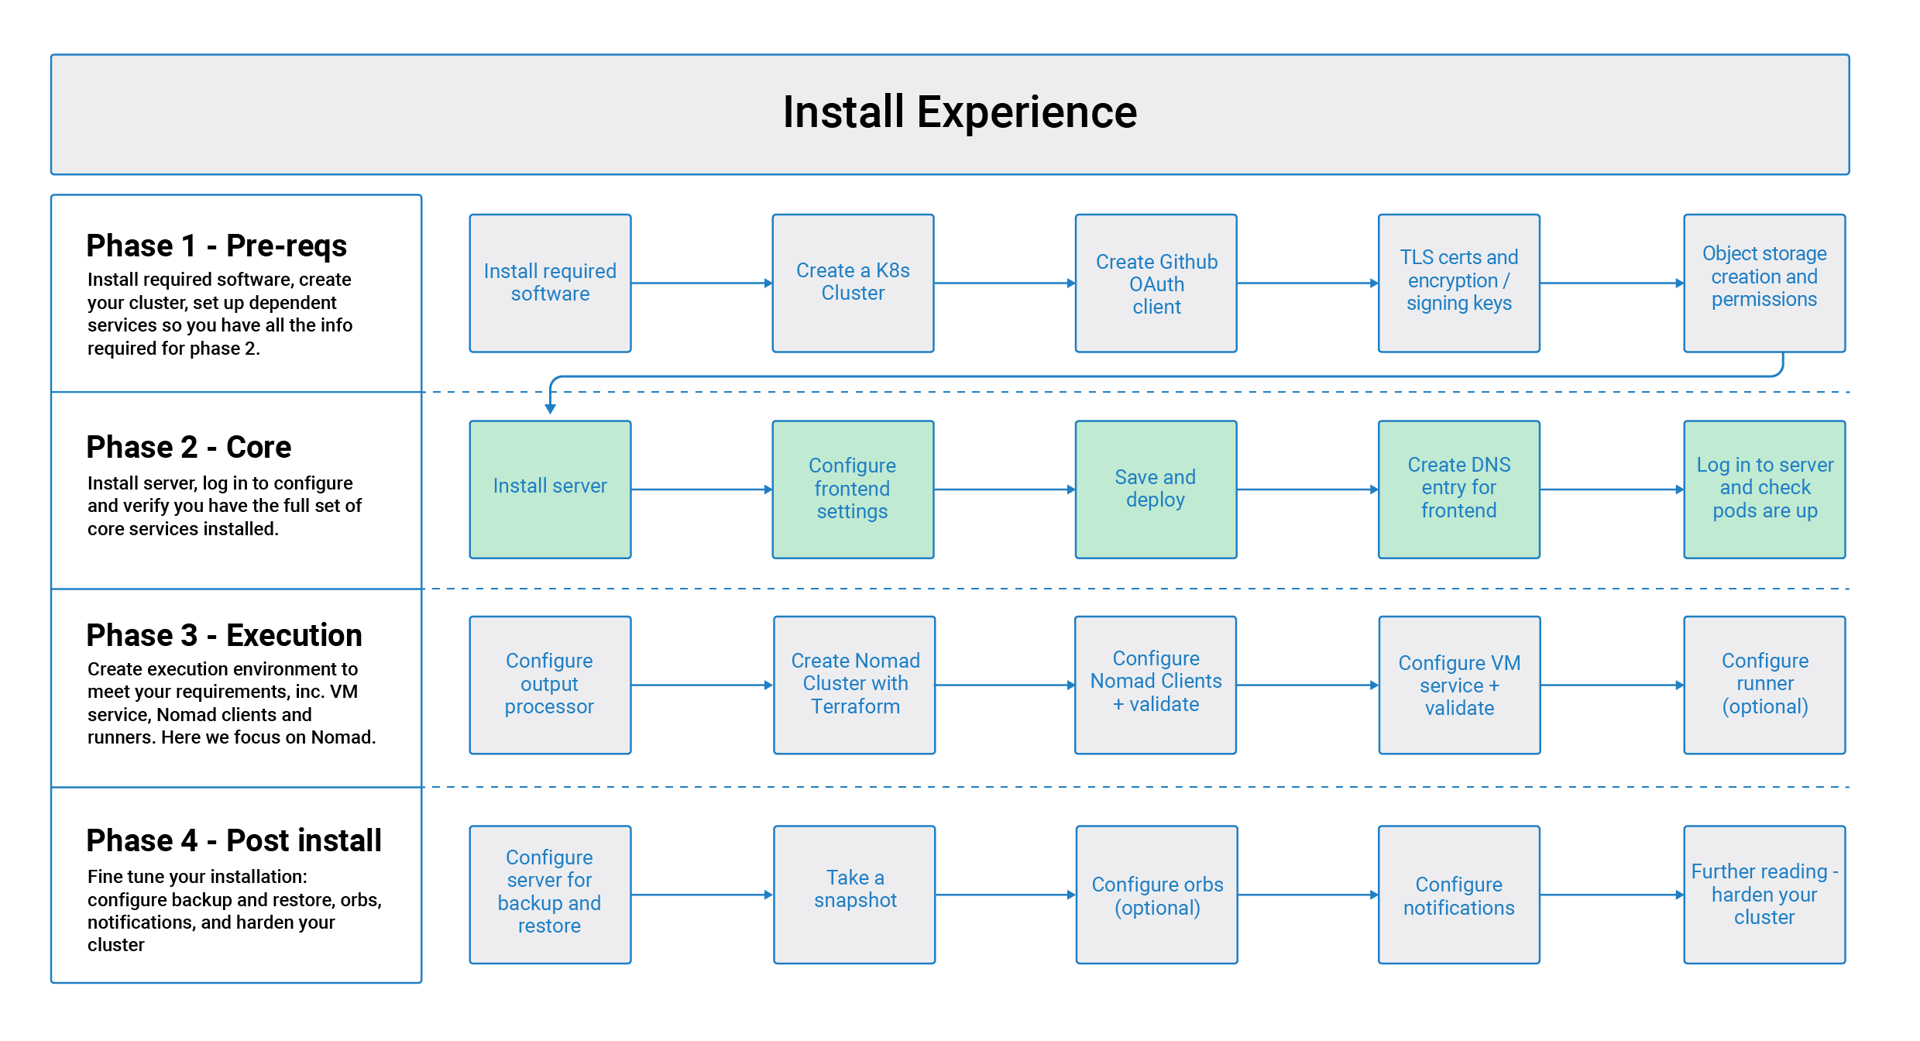 Flow chart showing the installation flow for server 3.x with phase 2 highlighted